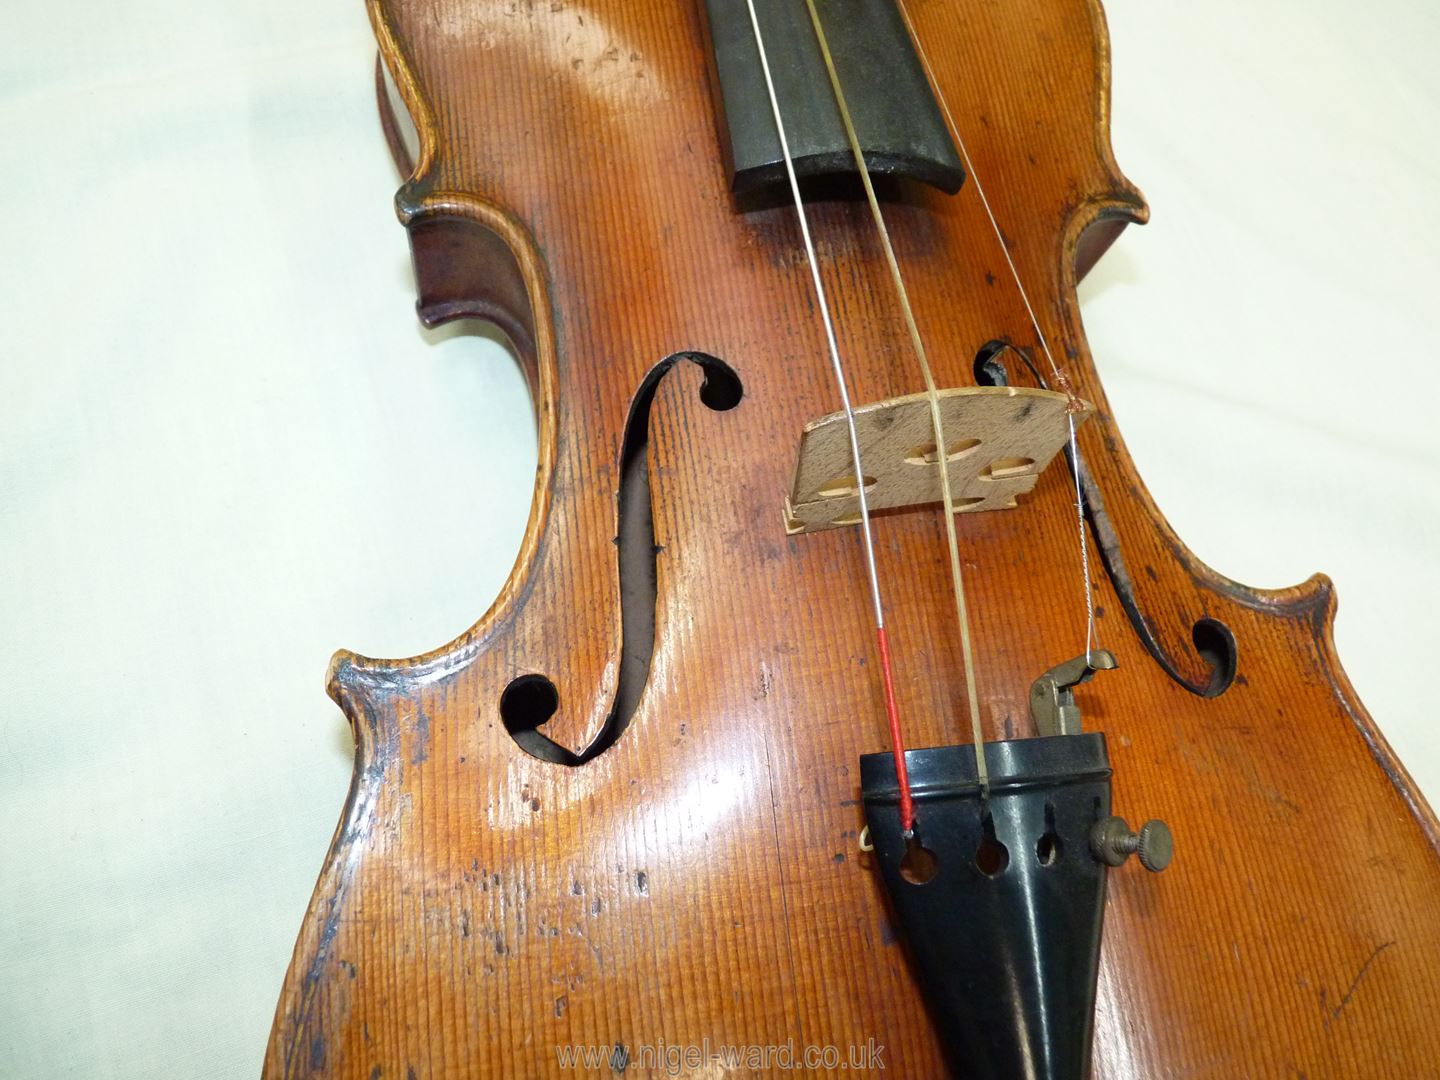 An antique violin having a well-carved scroll and nicely figured body including the back, - Image 19 of 49